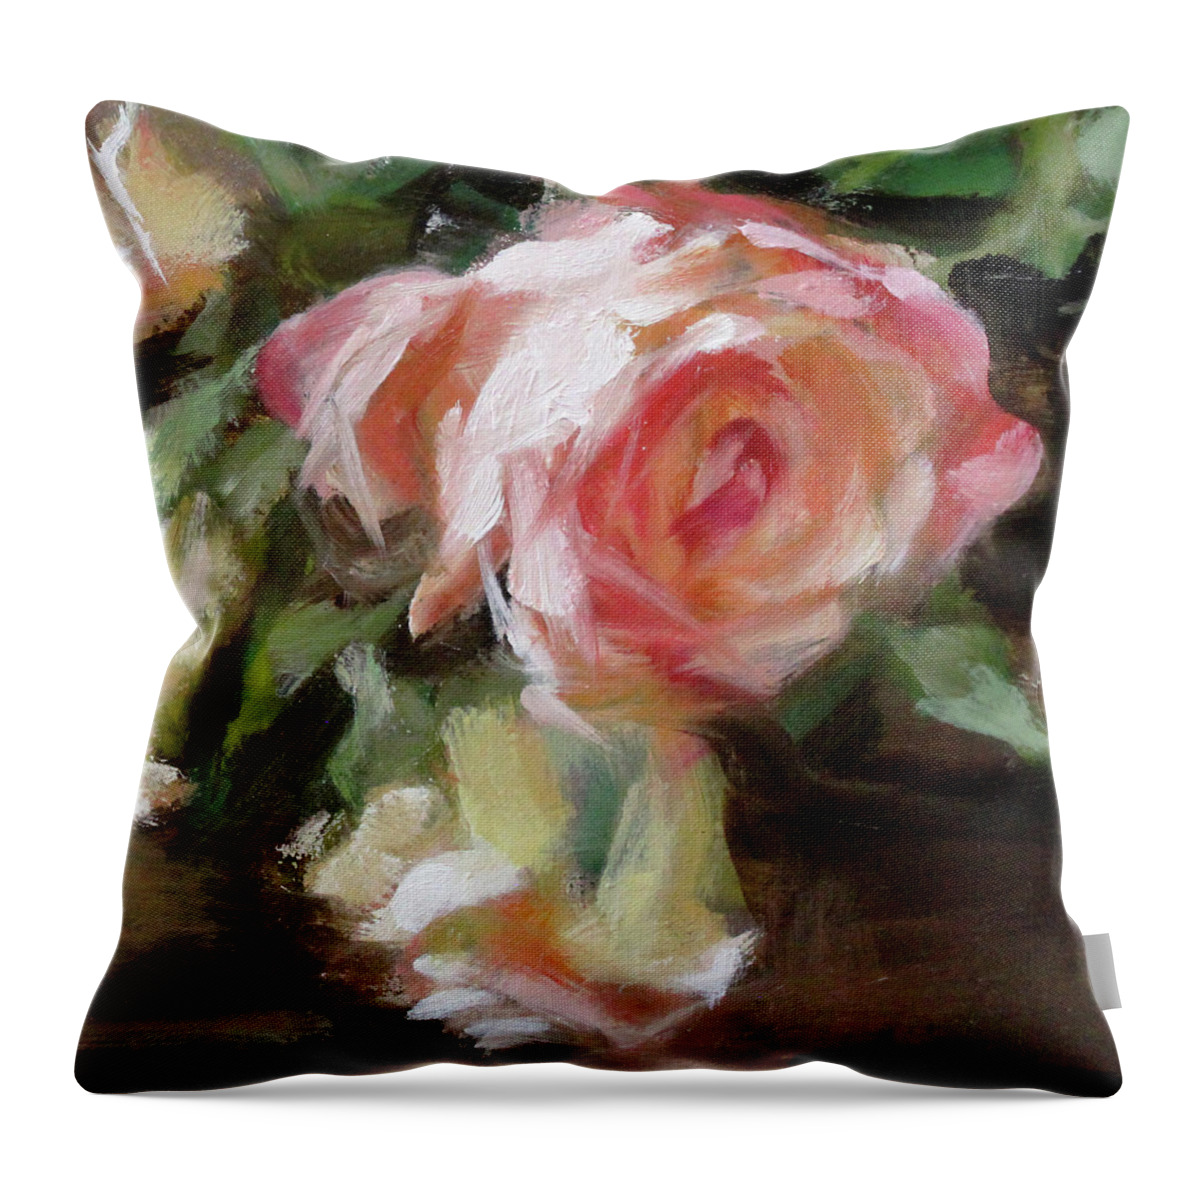  Throw Pillow featuring the painting A Bunch of Roses Detail 5 by Roxanne Dyer